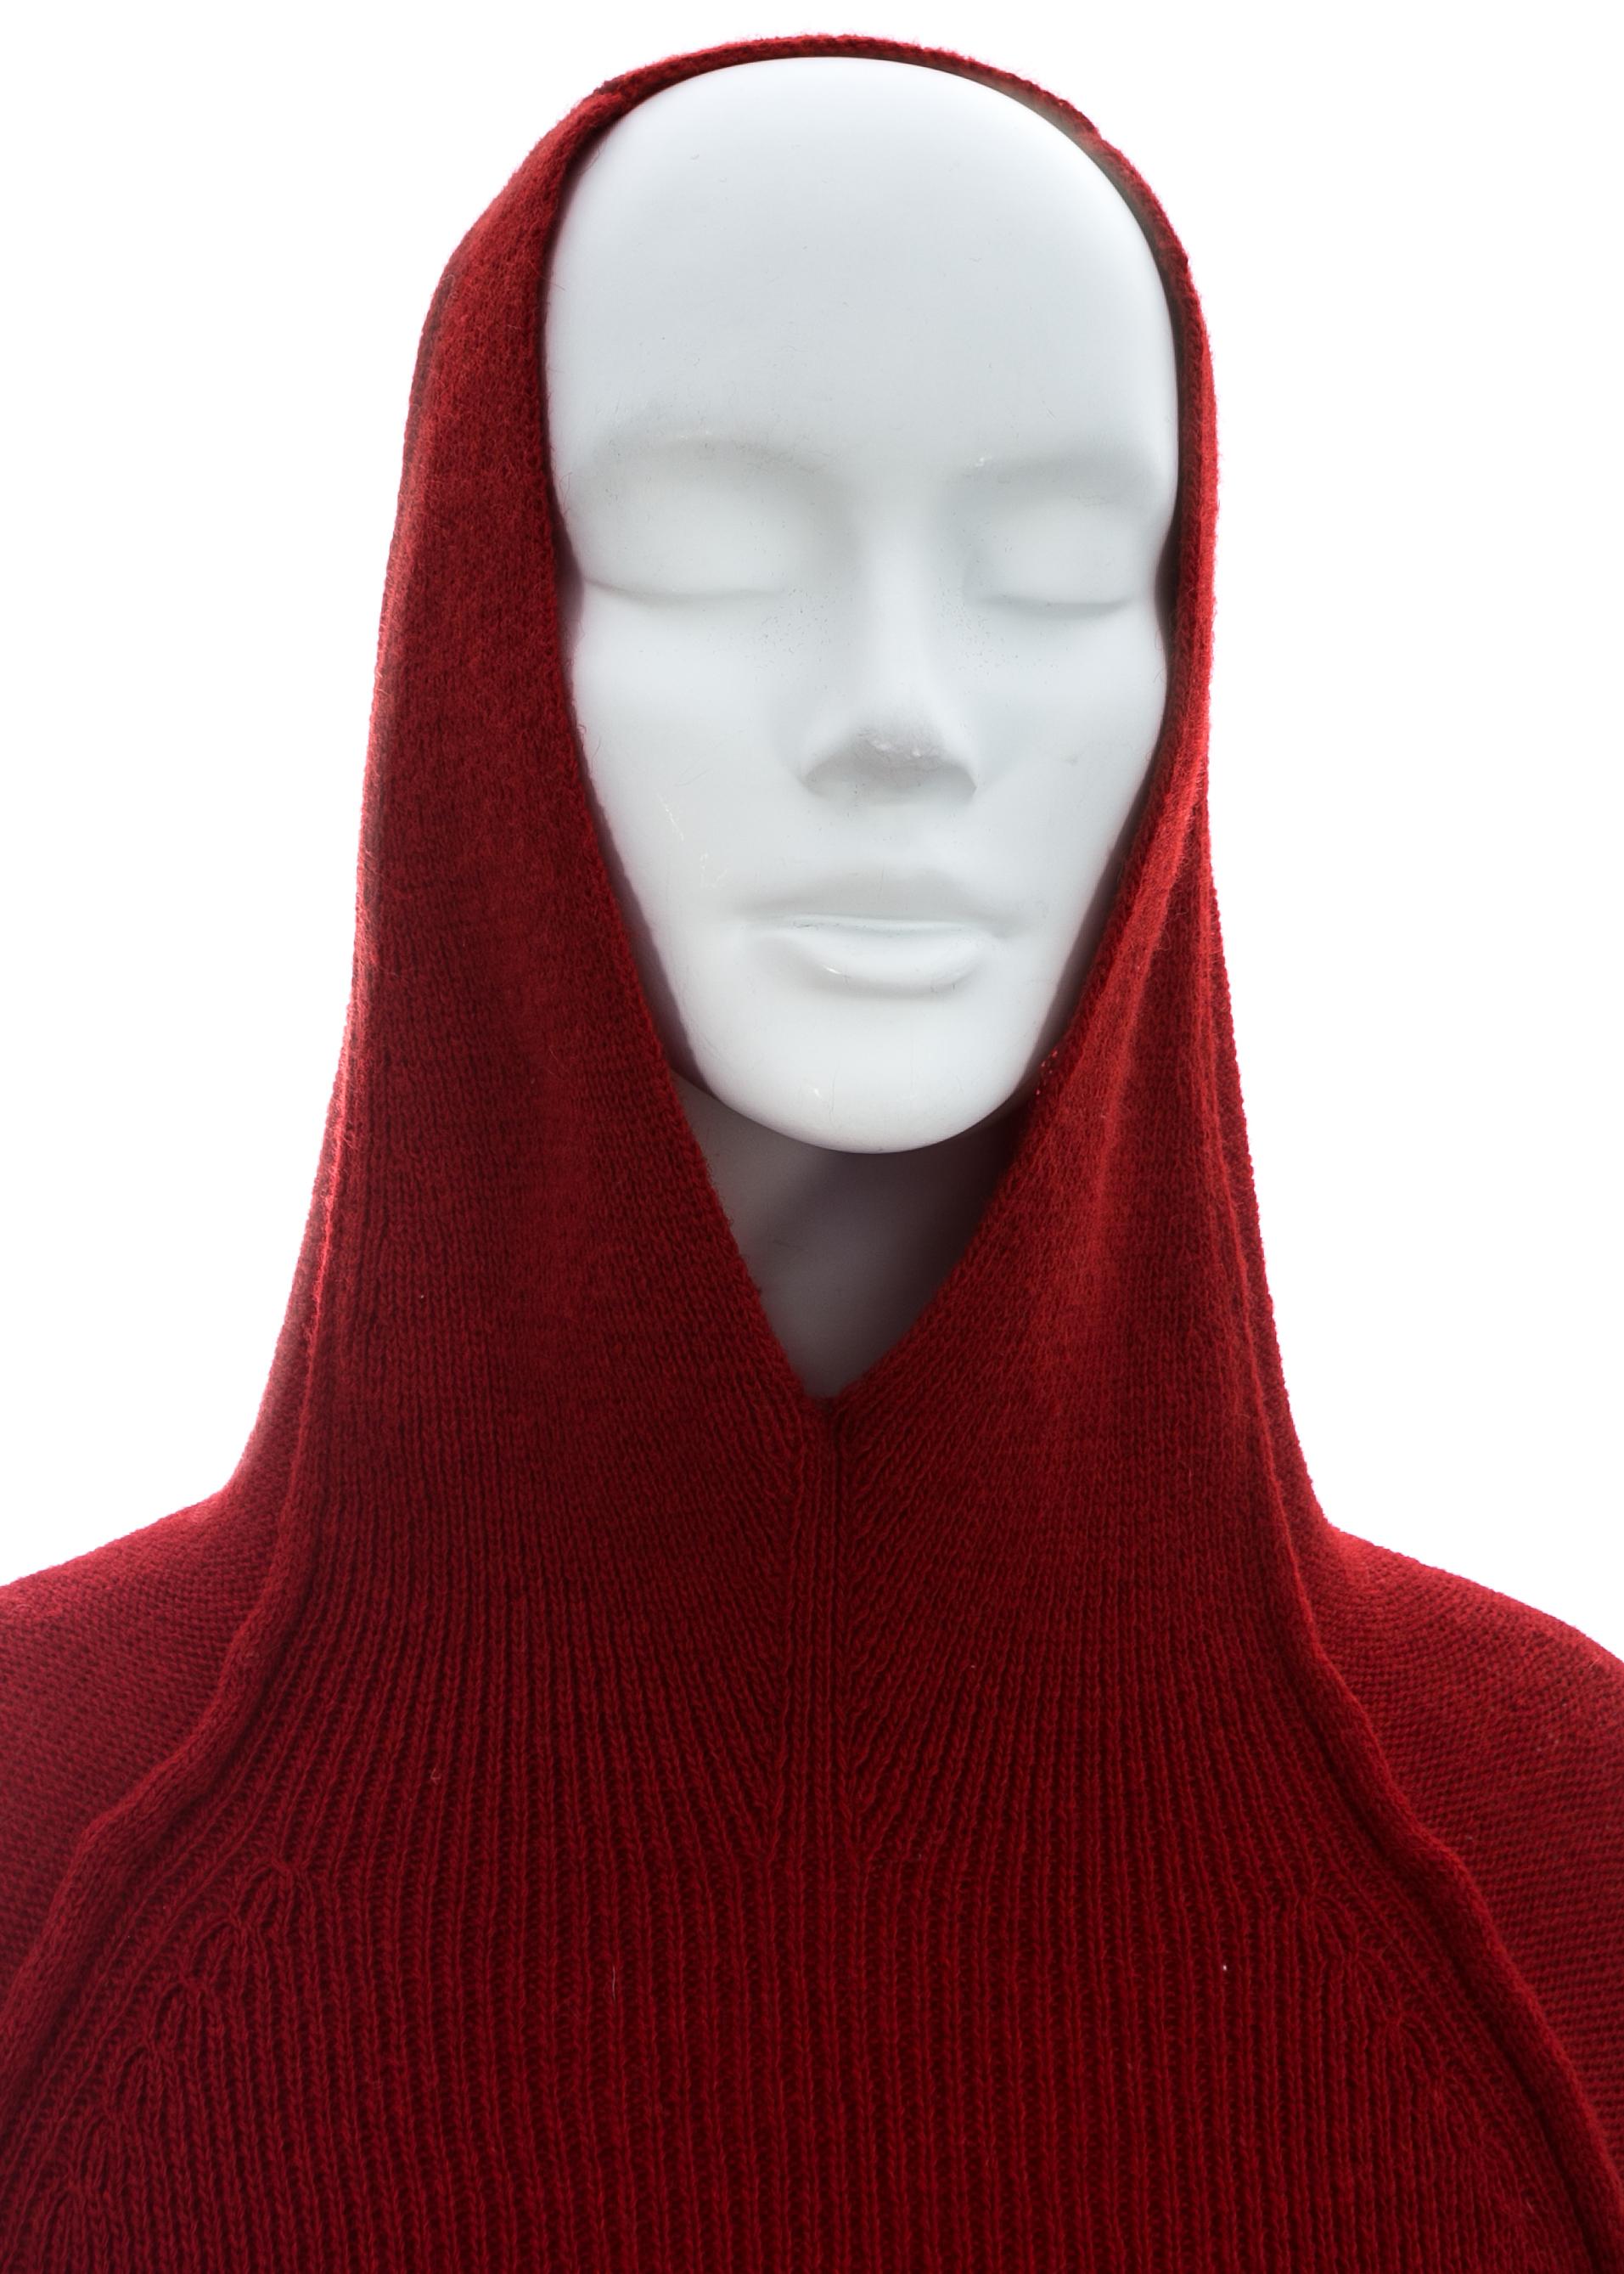 Yohji Yamamoto red wool hooded knitted maxi dress, c. 1990s In Good Condition For Sale In London, GB